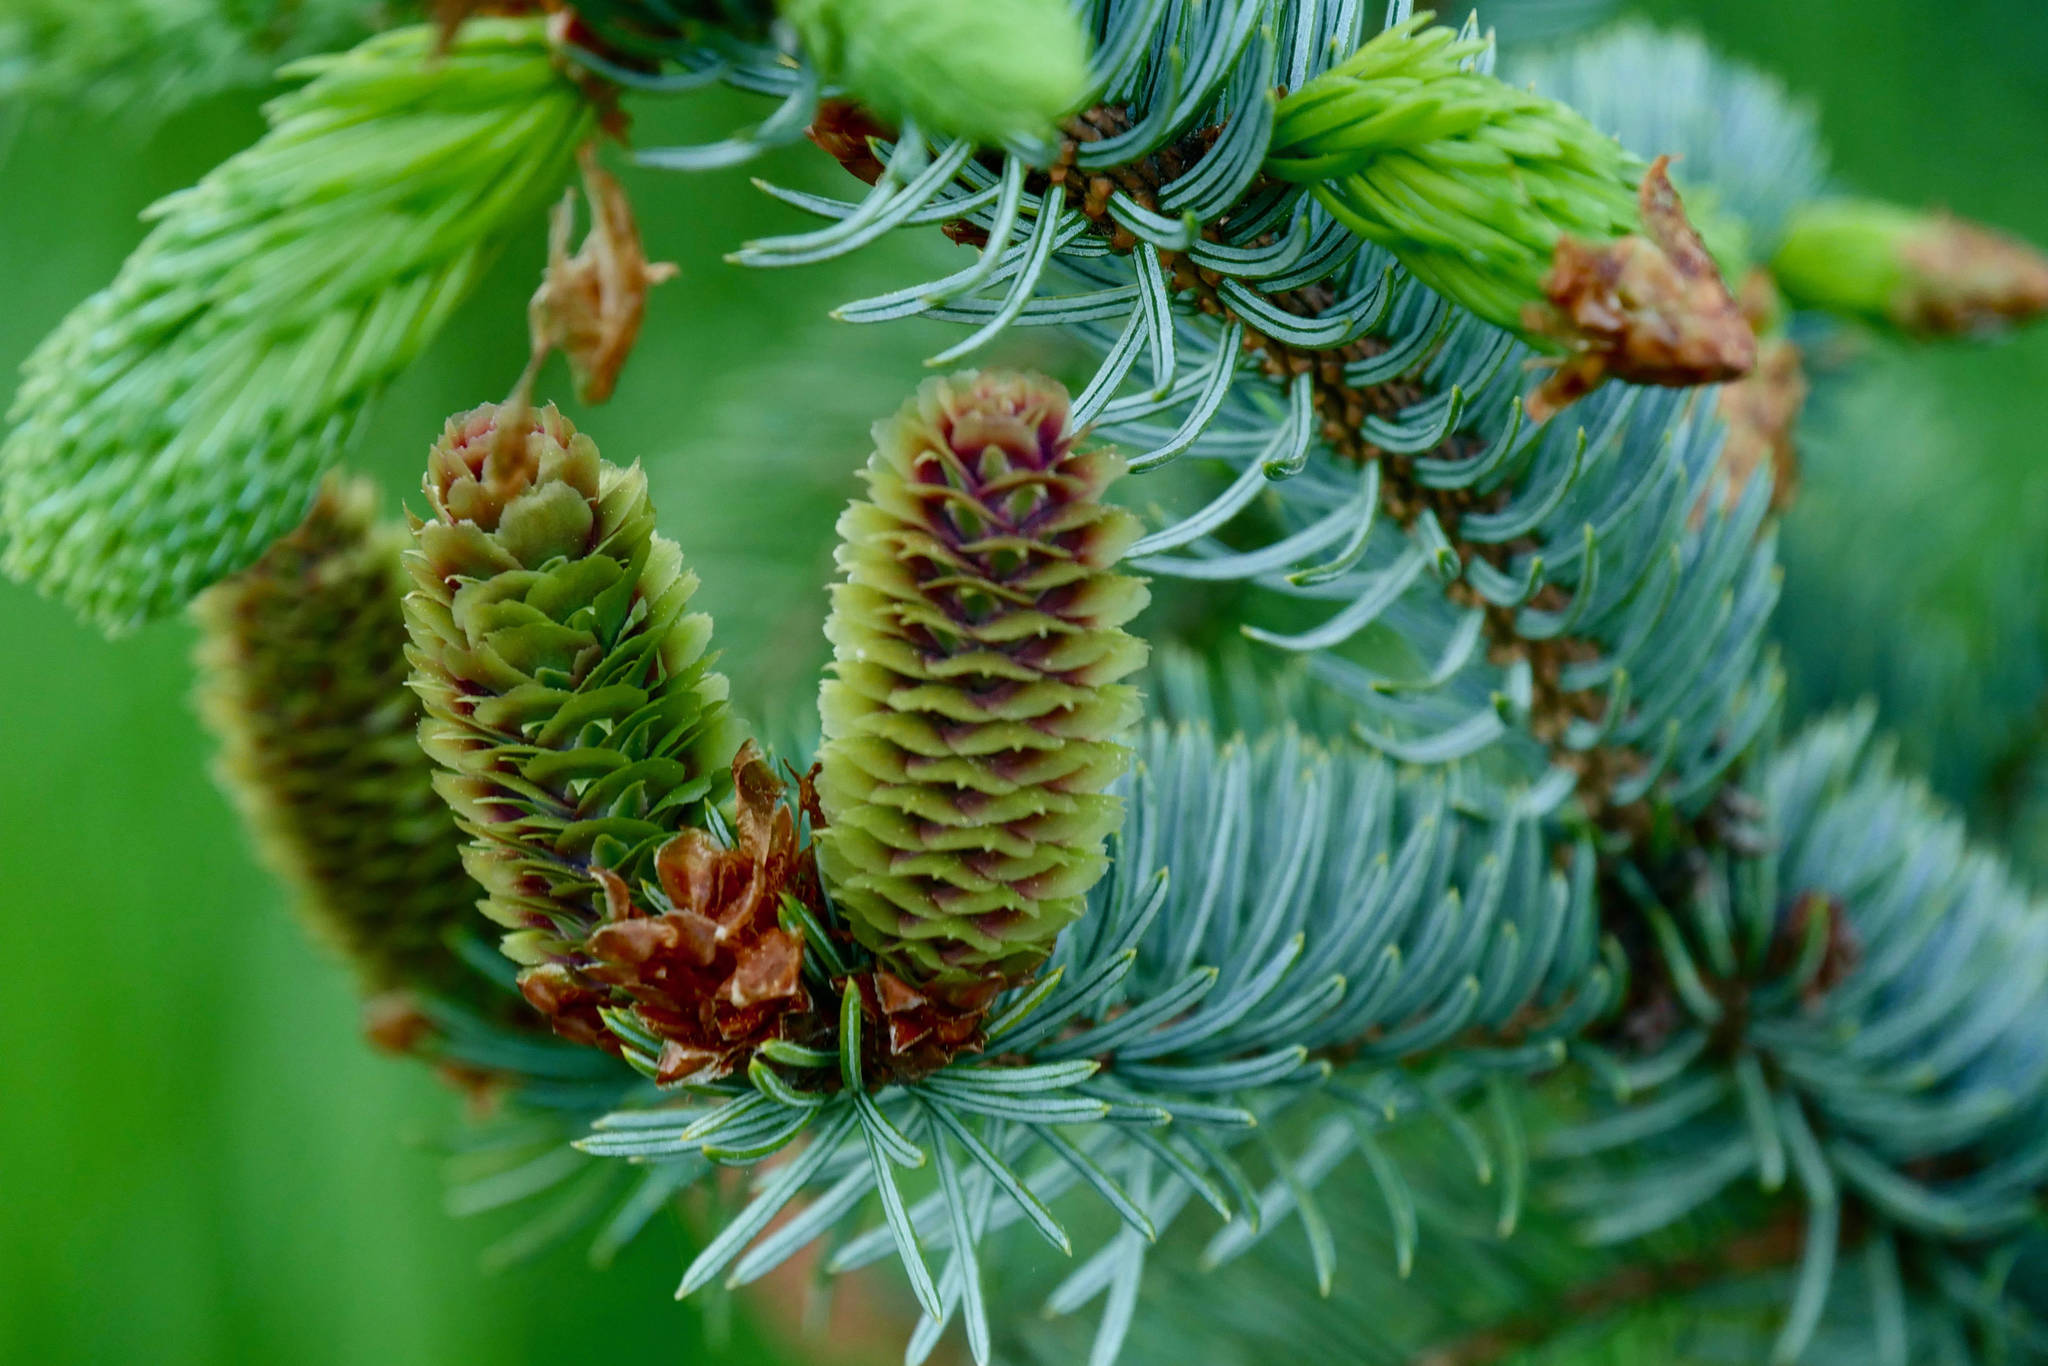 Baby spruce cones at Fish Creek on May 22, 2019. (Courtesy Photo | Janine Reep)